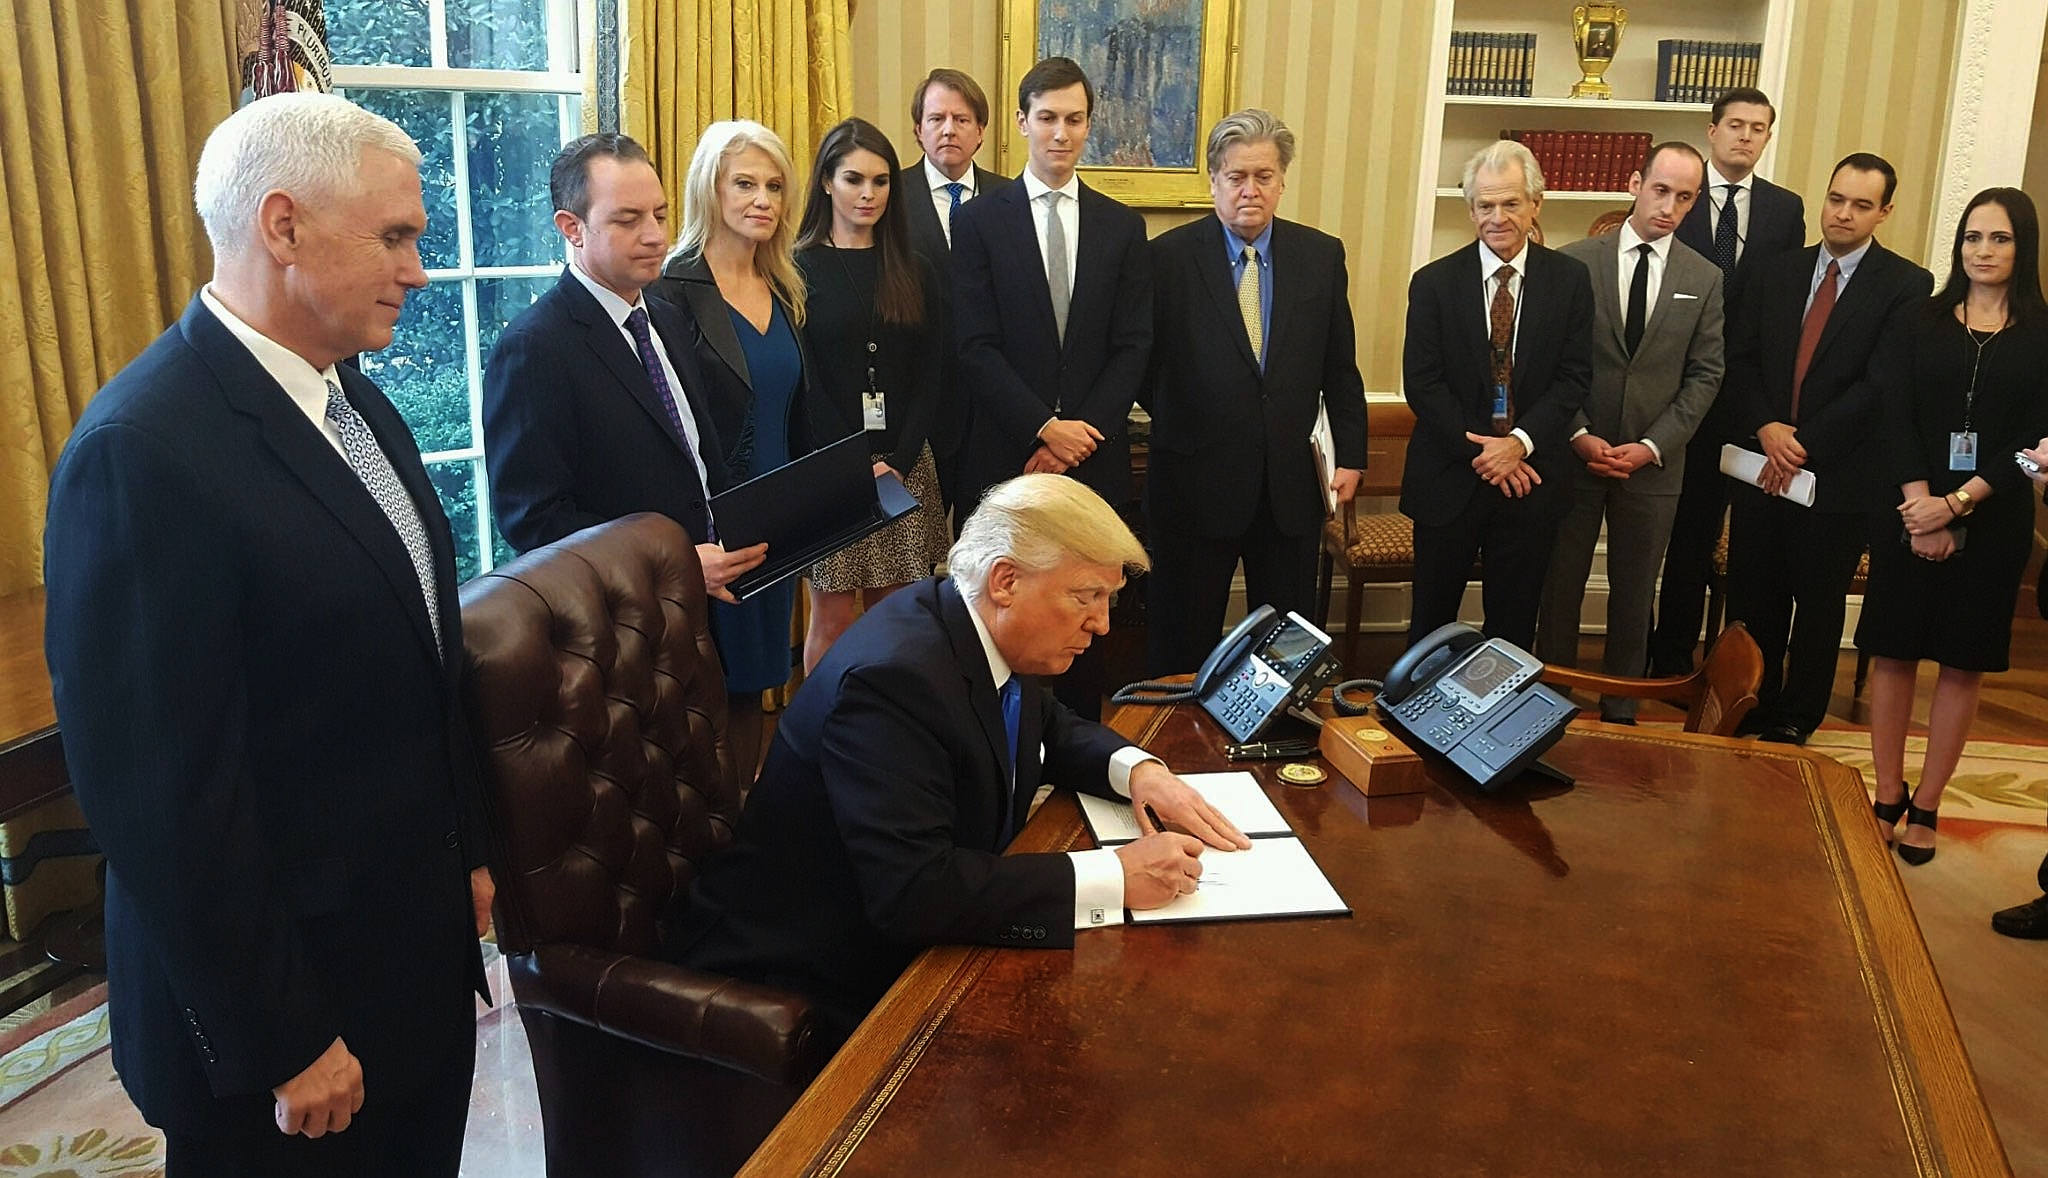 Donald Trump signs orders to green-light the Keystone XL and Dakota Access pipelines. Steve Bannon in center wearing blue shirt. (Image: Office of the President of the United States via Wikimedia Commons)